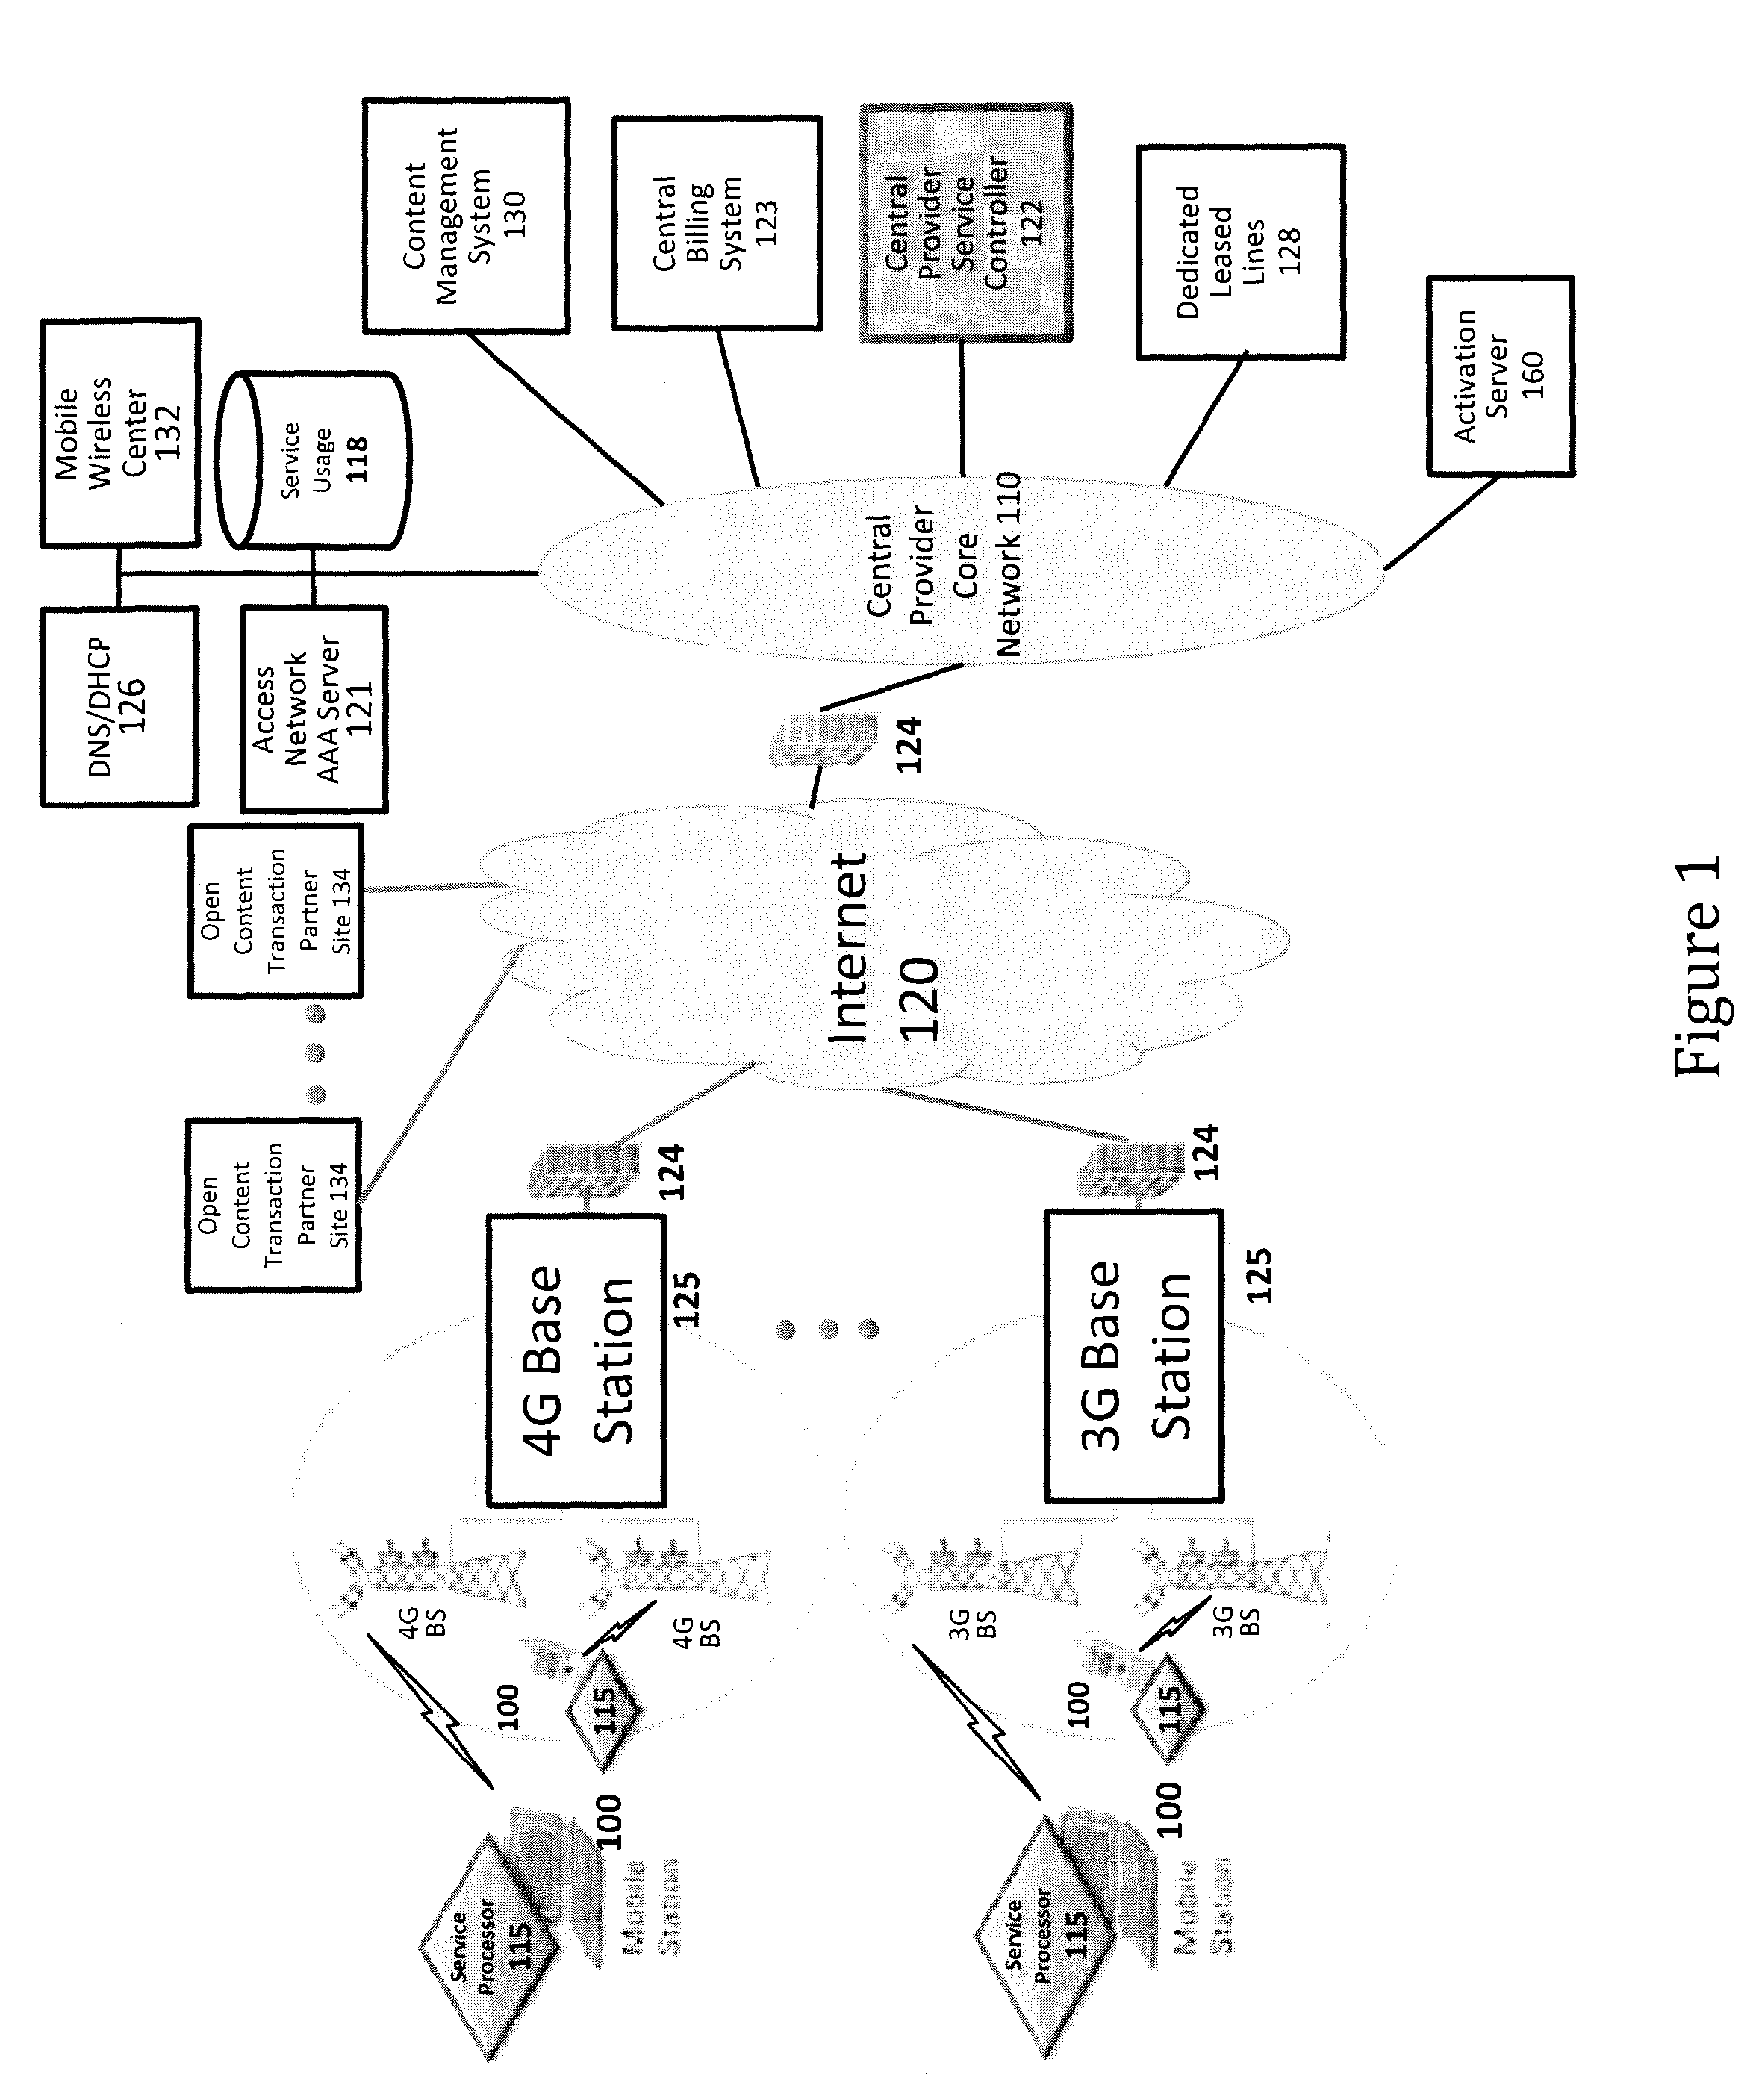 Verifiable device assisted service usage billing with integrated accounting, mediation accounting, and multi-account